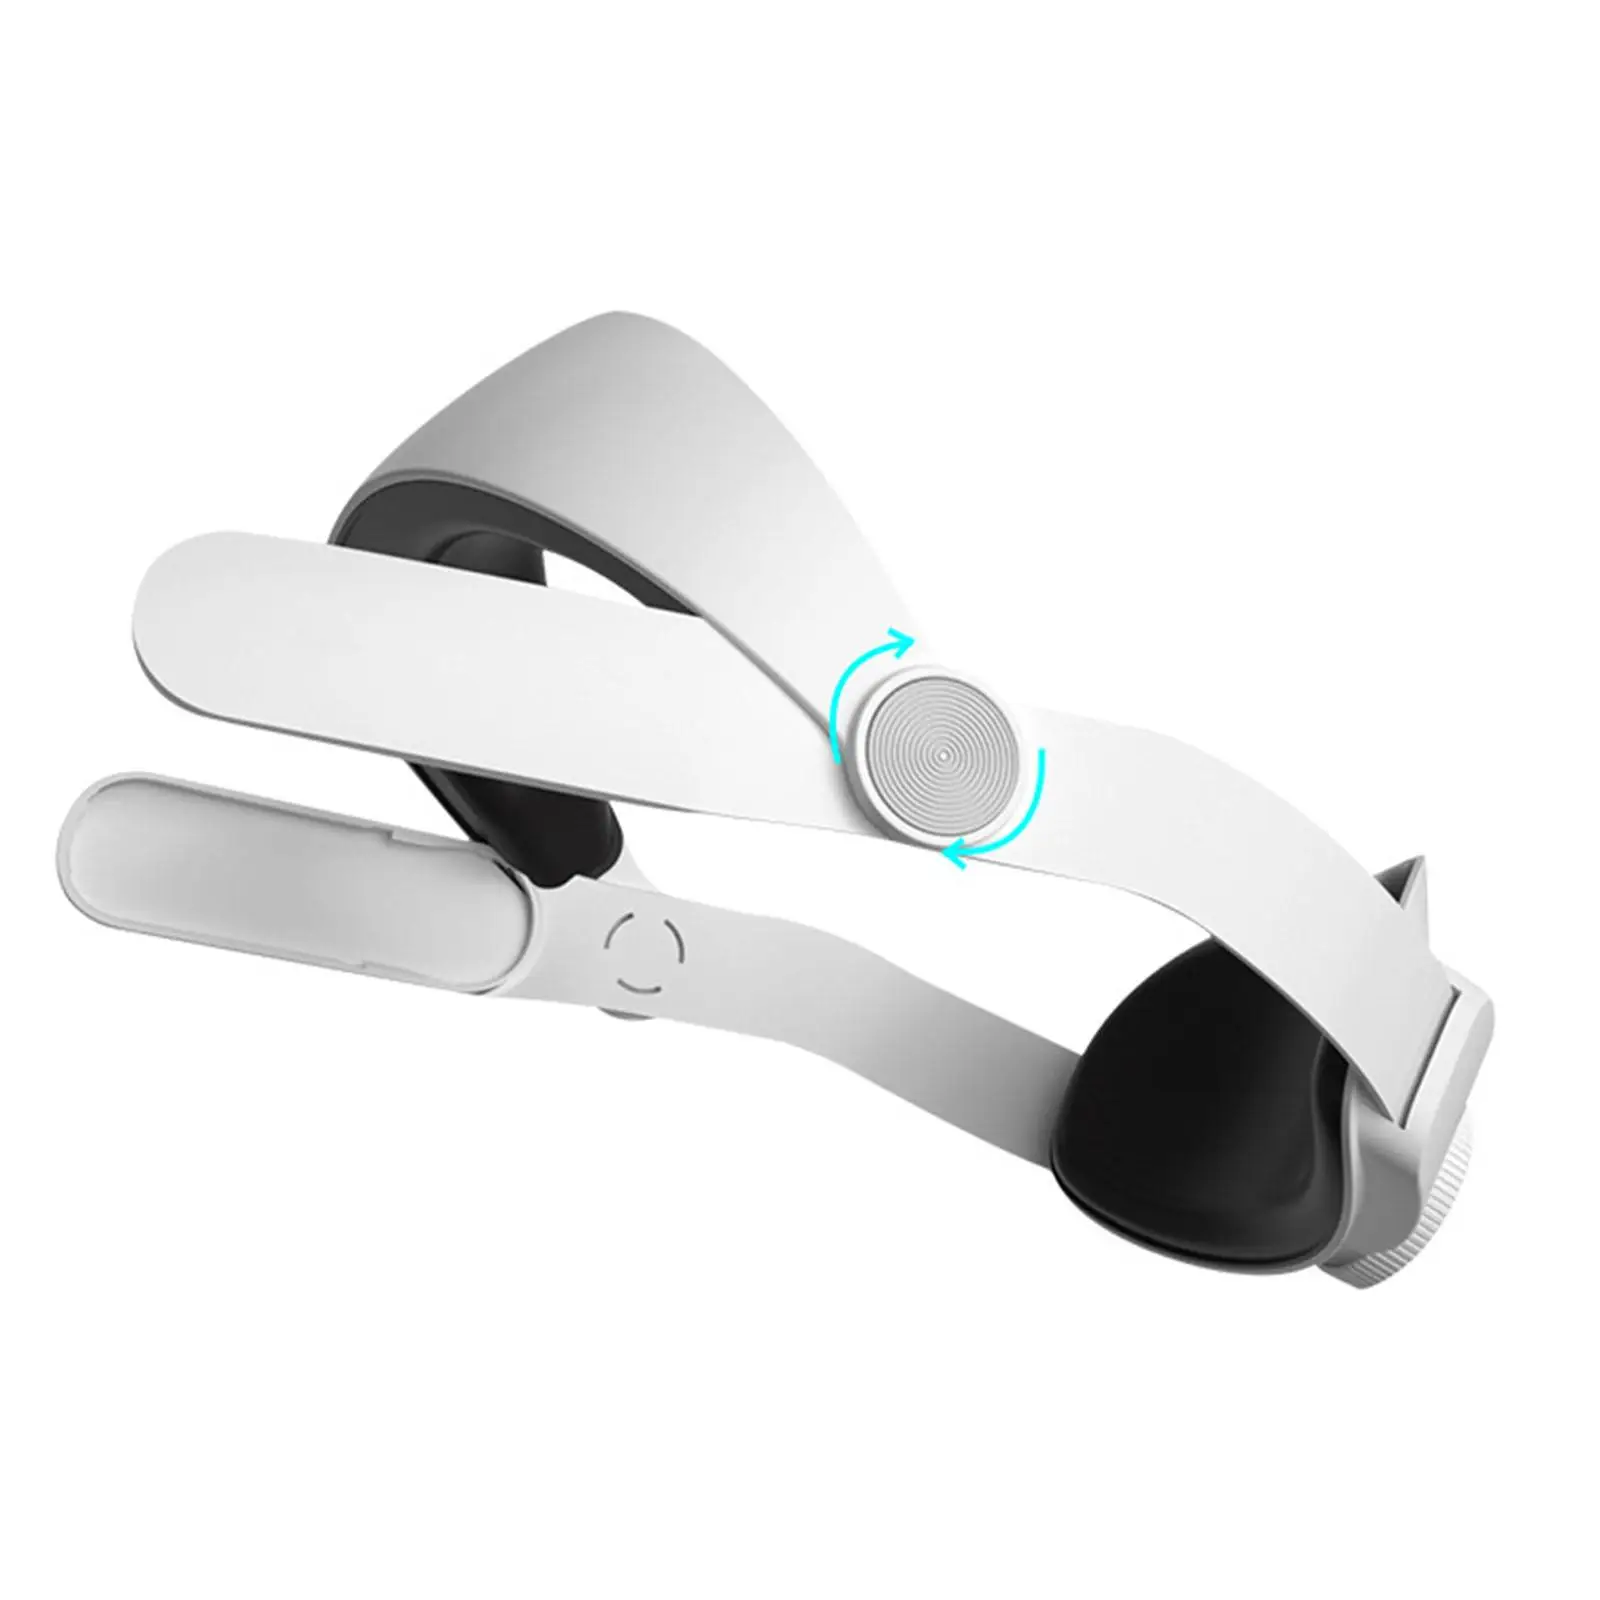 Adjustable Headband Replacement with Cushion Pad VR Head Strap for 3D Glasses Protective Accessories White